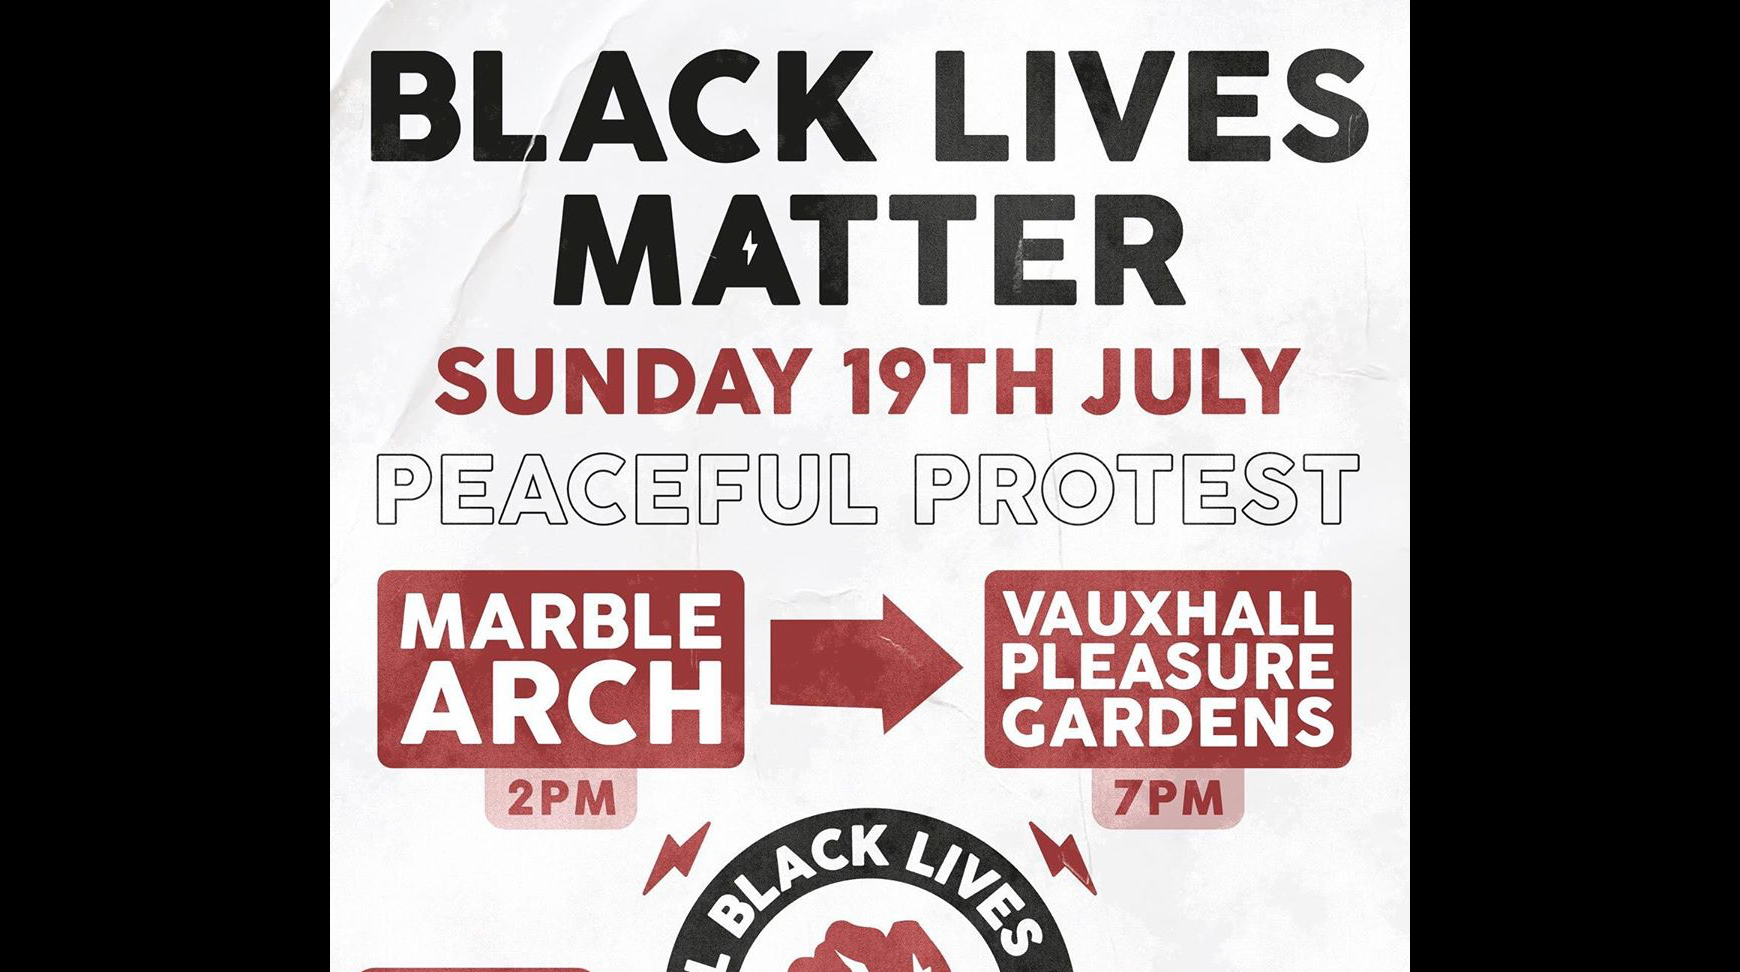 All Black Lives UK London BLM protest – Sunday 19 July 2pm Marble Arch